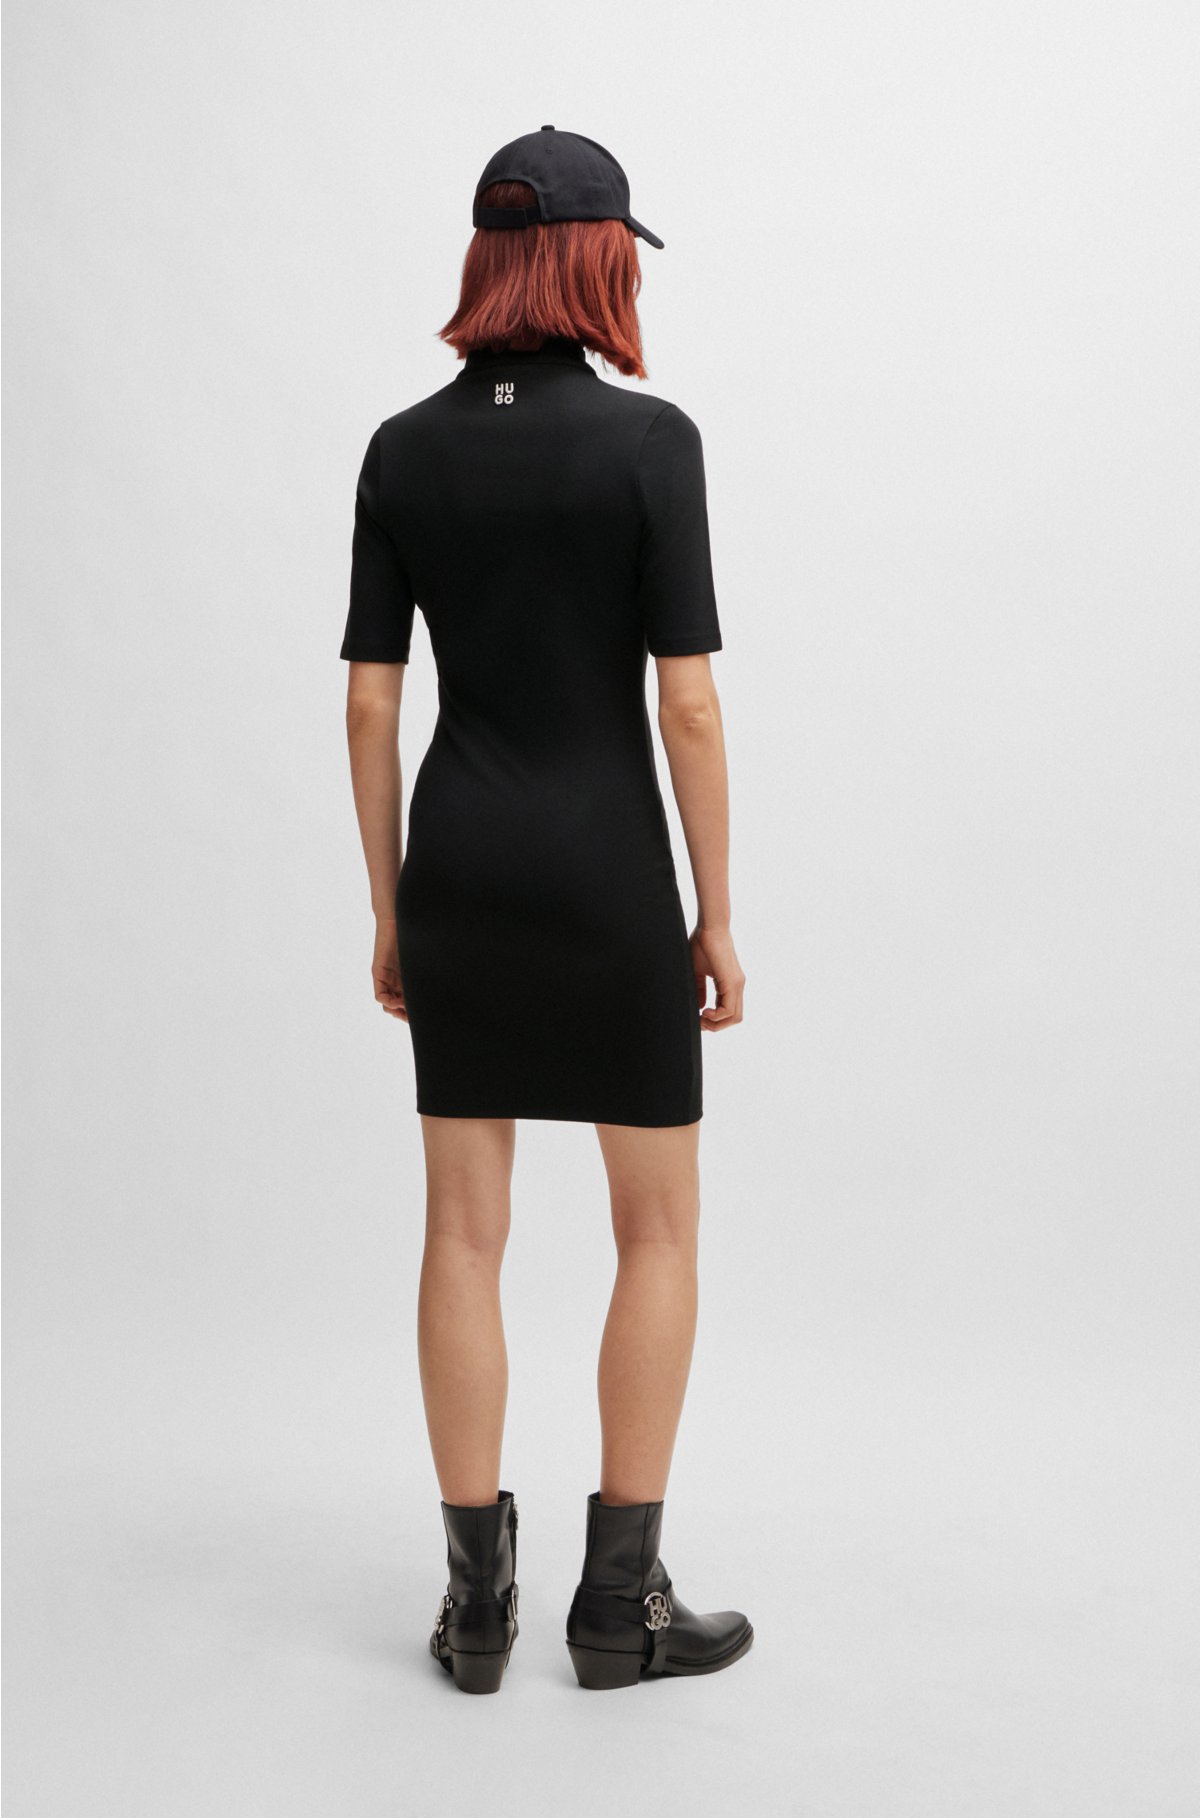 Zip-neck dress in stretch jersey with stacked logo, Black